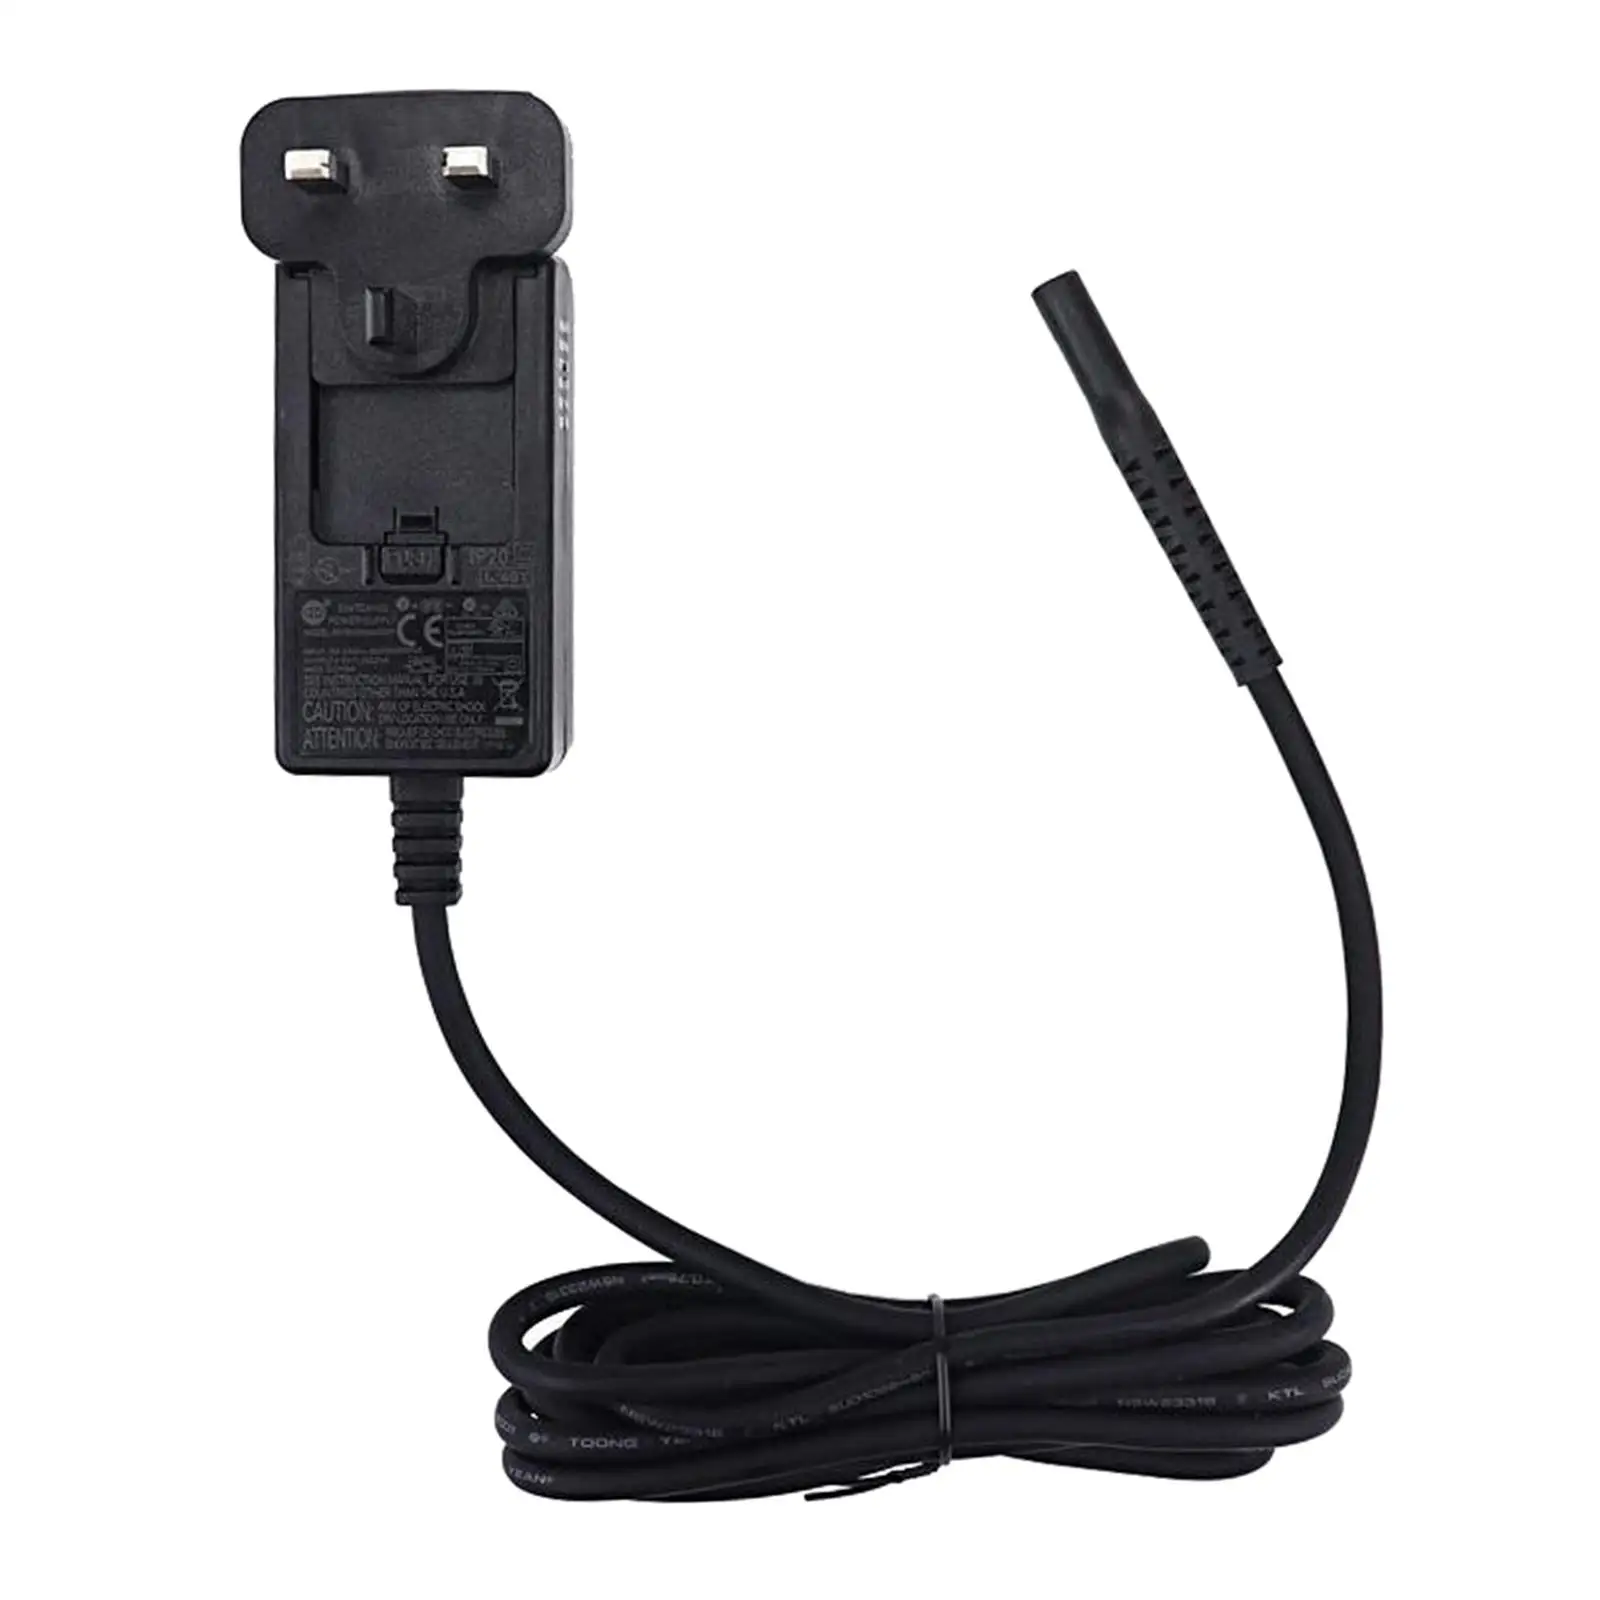 Wall Home AC Adapter Charger for Wahl 5-Star 8148 8504 Trimmer 